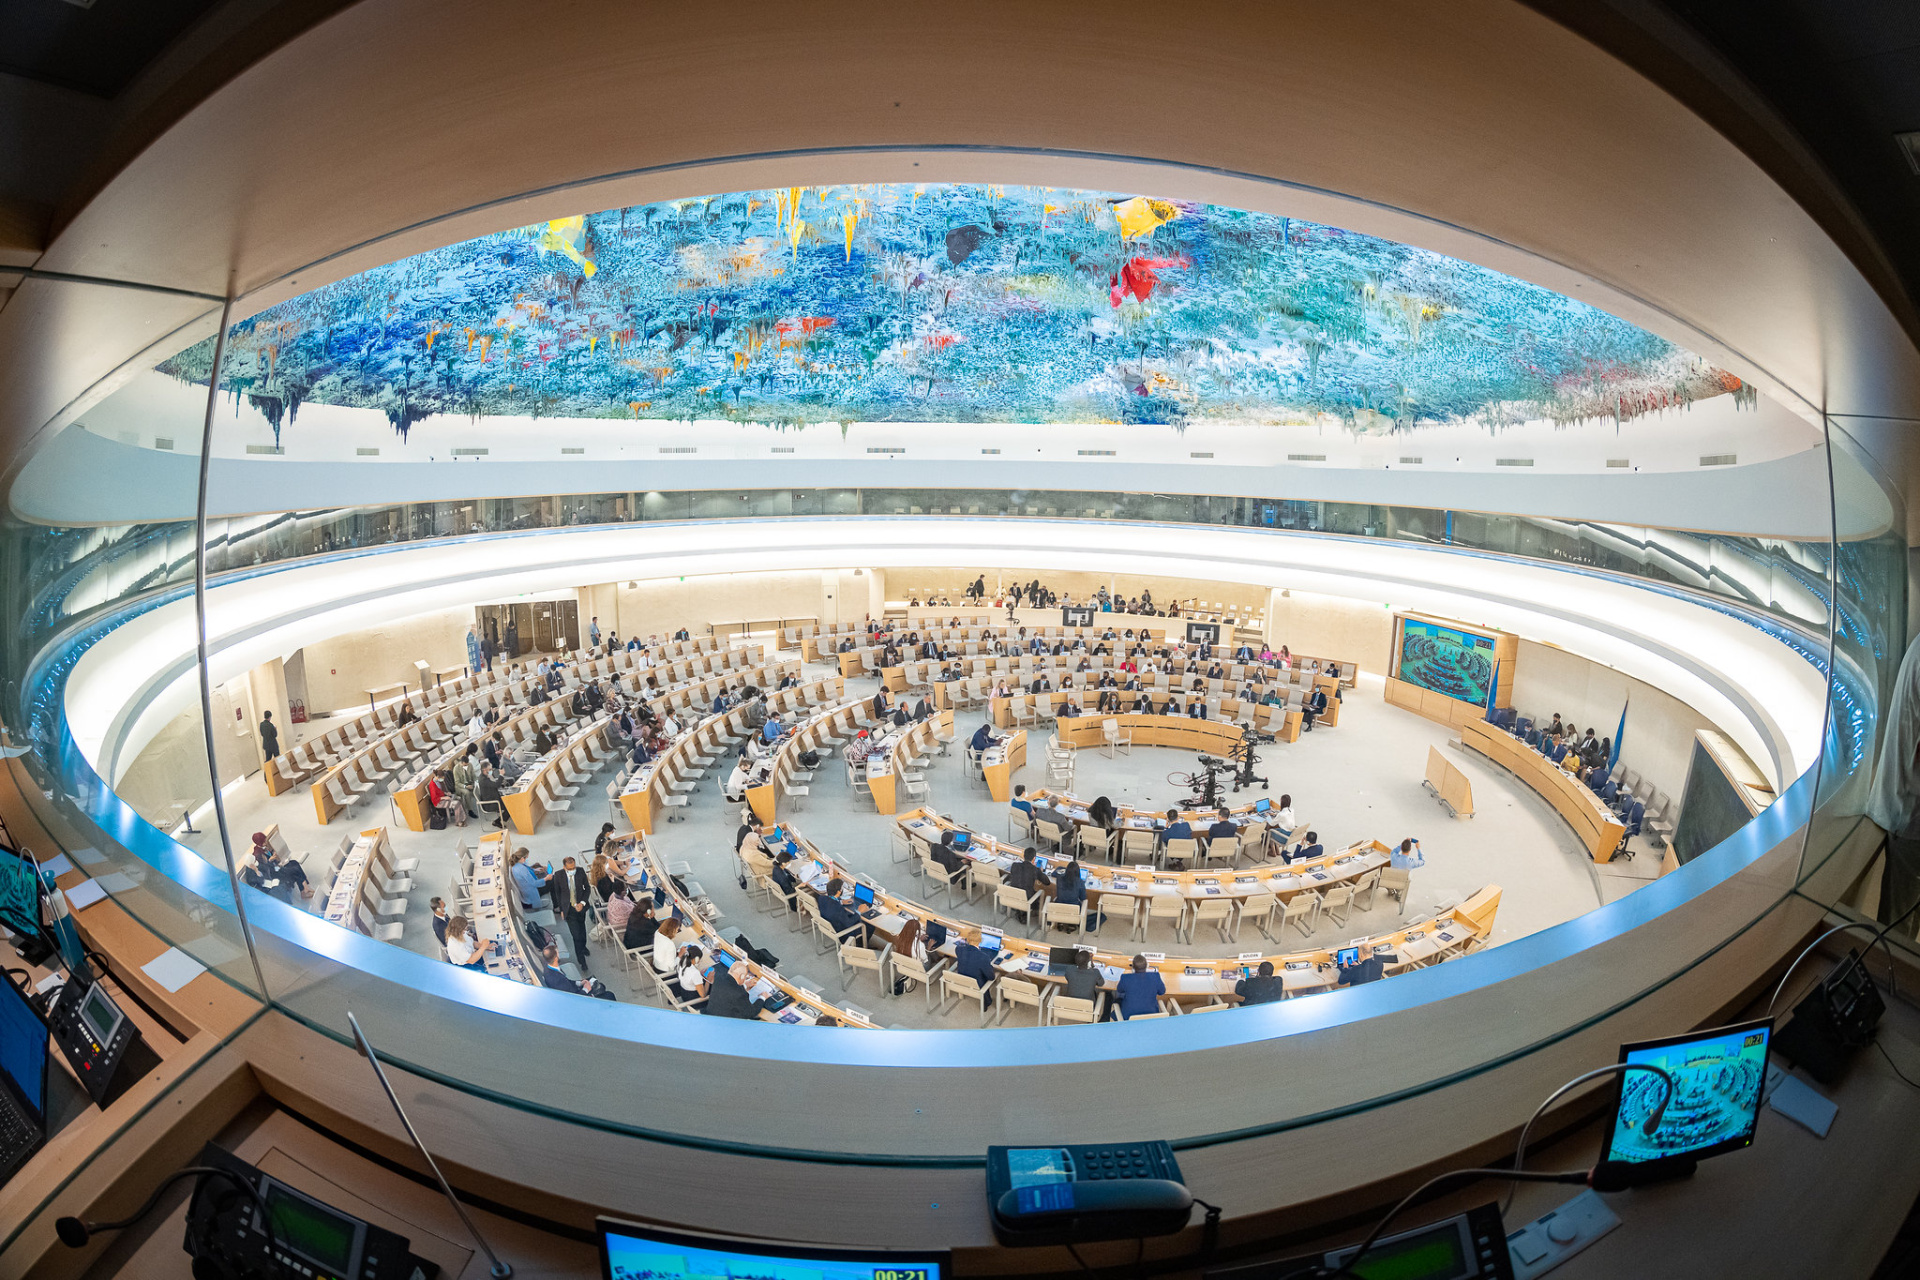 A bird's view on the Human Rights Council chamber